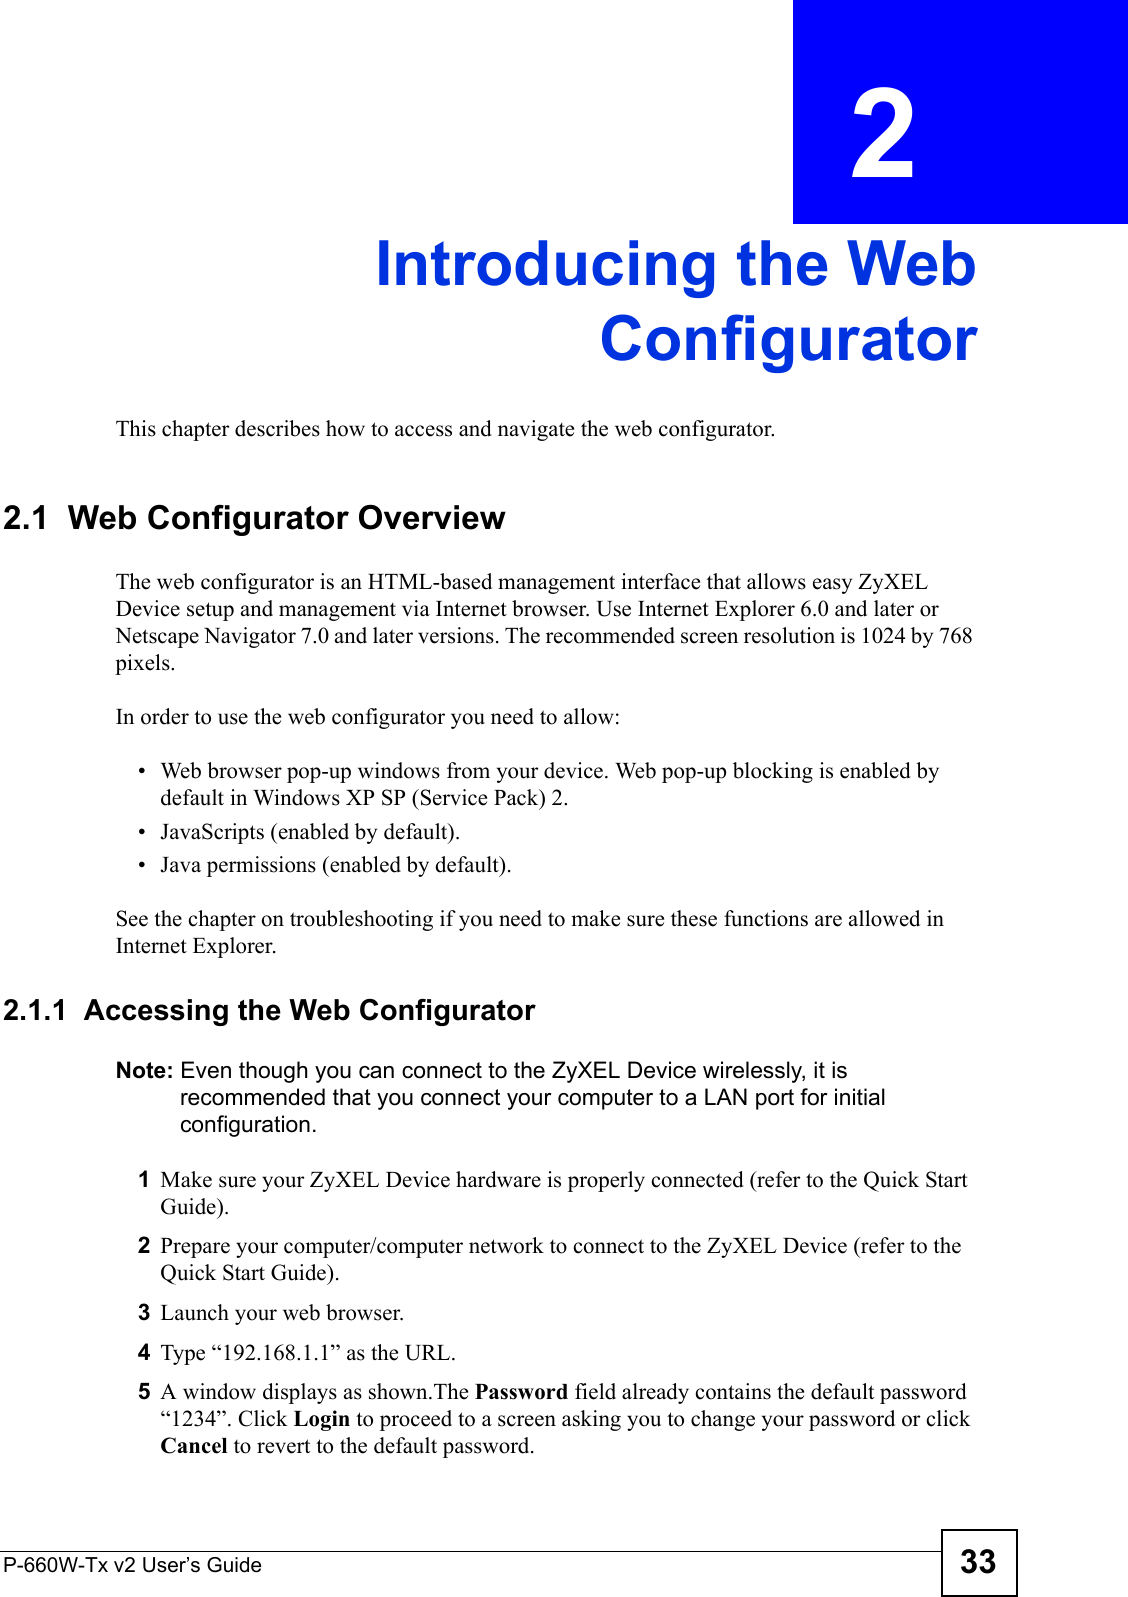 P-660W-Tx v2 User’s Guide 33CHAPTER  2 Introducing the WebConfiguratorThis chapter describes how to access and navigate the web configurator.2.1  Web Configurator OverviewThe web configurator is an HTML-based management interface that allows easy ZyXEL Device setup and management via Internet browser. Use Internet Explorer 6.0 and later or Netscape Navigator 7.0 and later versions. The recommended screen resolution is 1024 by 768 pixels.In order to use the web configurator you need to allow:• Web browser pop-up windows from your device. Web pop-up blocking is enabled by default in Windows XP SP (Service Pack) 2.• JavaScripts (enabled by default).• Java permissions (enabled by default).See the chapter on troubleshooting if you need to make sure these functions are allowed in Internet Explorer.2.1.1  Accessing the Web Configurator Note: Even though you can connect to the ZyXEL Device wirelessly, it is recommended that you connect your computer to a LAN port for initial configuration.1Make sure your ZyXEL Device hardware is properly connected (refer to the Quick Start Guide).2Prepare your computer/computer network to connect to the ZyXEL Device (refer to the Quick Start Guide).3Launch your web browser.4Type “192.168.1.1” as the URL.5A window displays as shown.The Password field already contains the default password “1234”. Click Login to proceed to a screen asking you to change your password or click Cancel to revert to the default password.